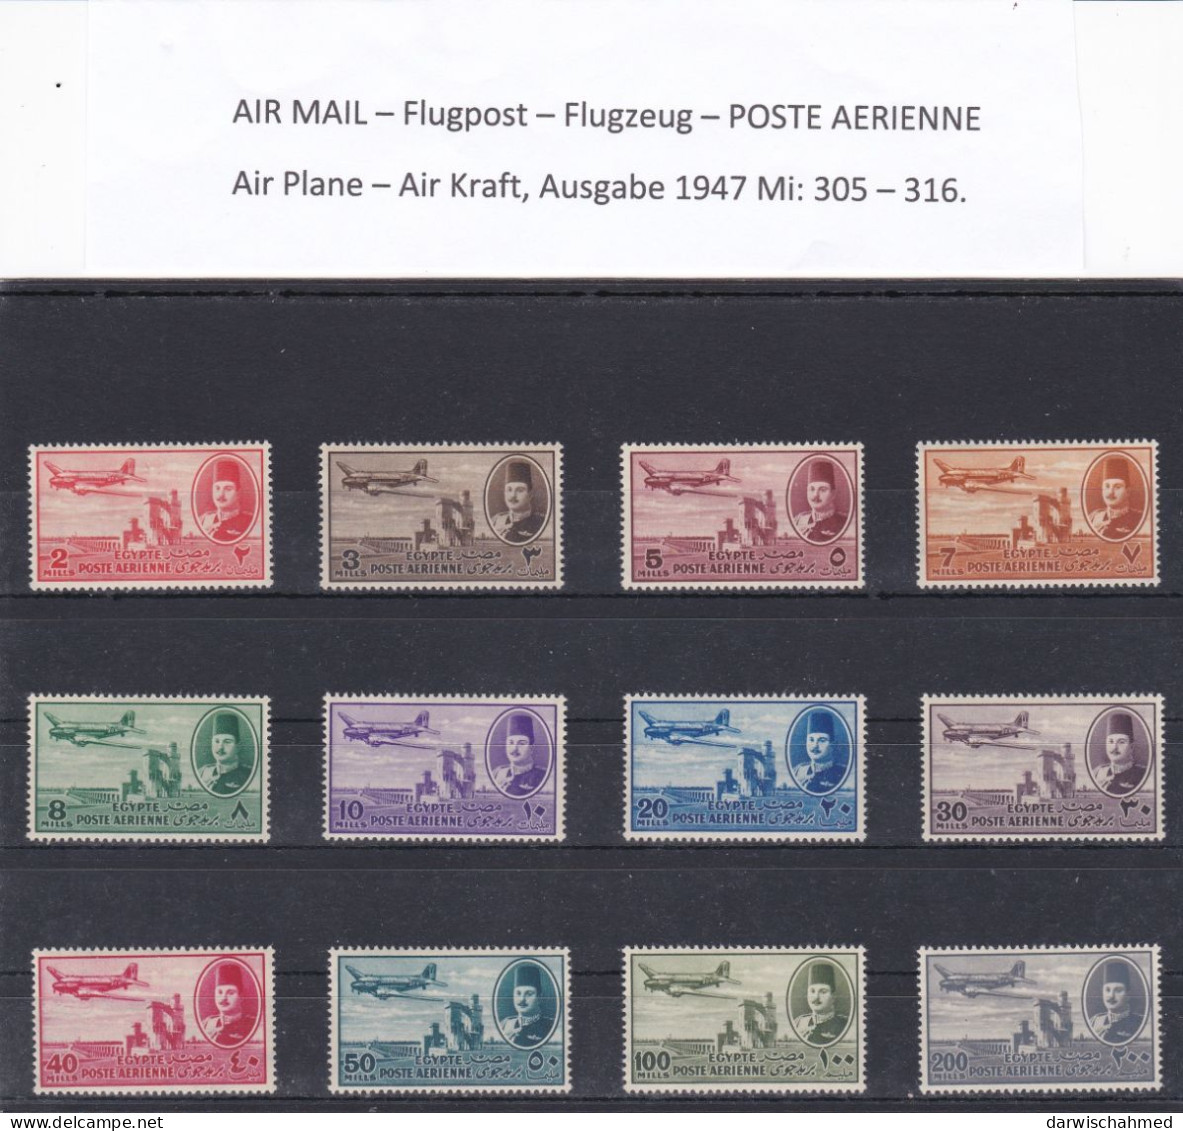 ÄGYPTEN - EGY-PT - EGYPTIAN -LUFTPOST-  FLUGPOST- AIR MAIL - POSTE AERIENNE - AIR PLANE MH - Unused Stamps